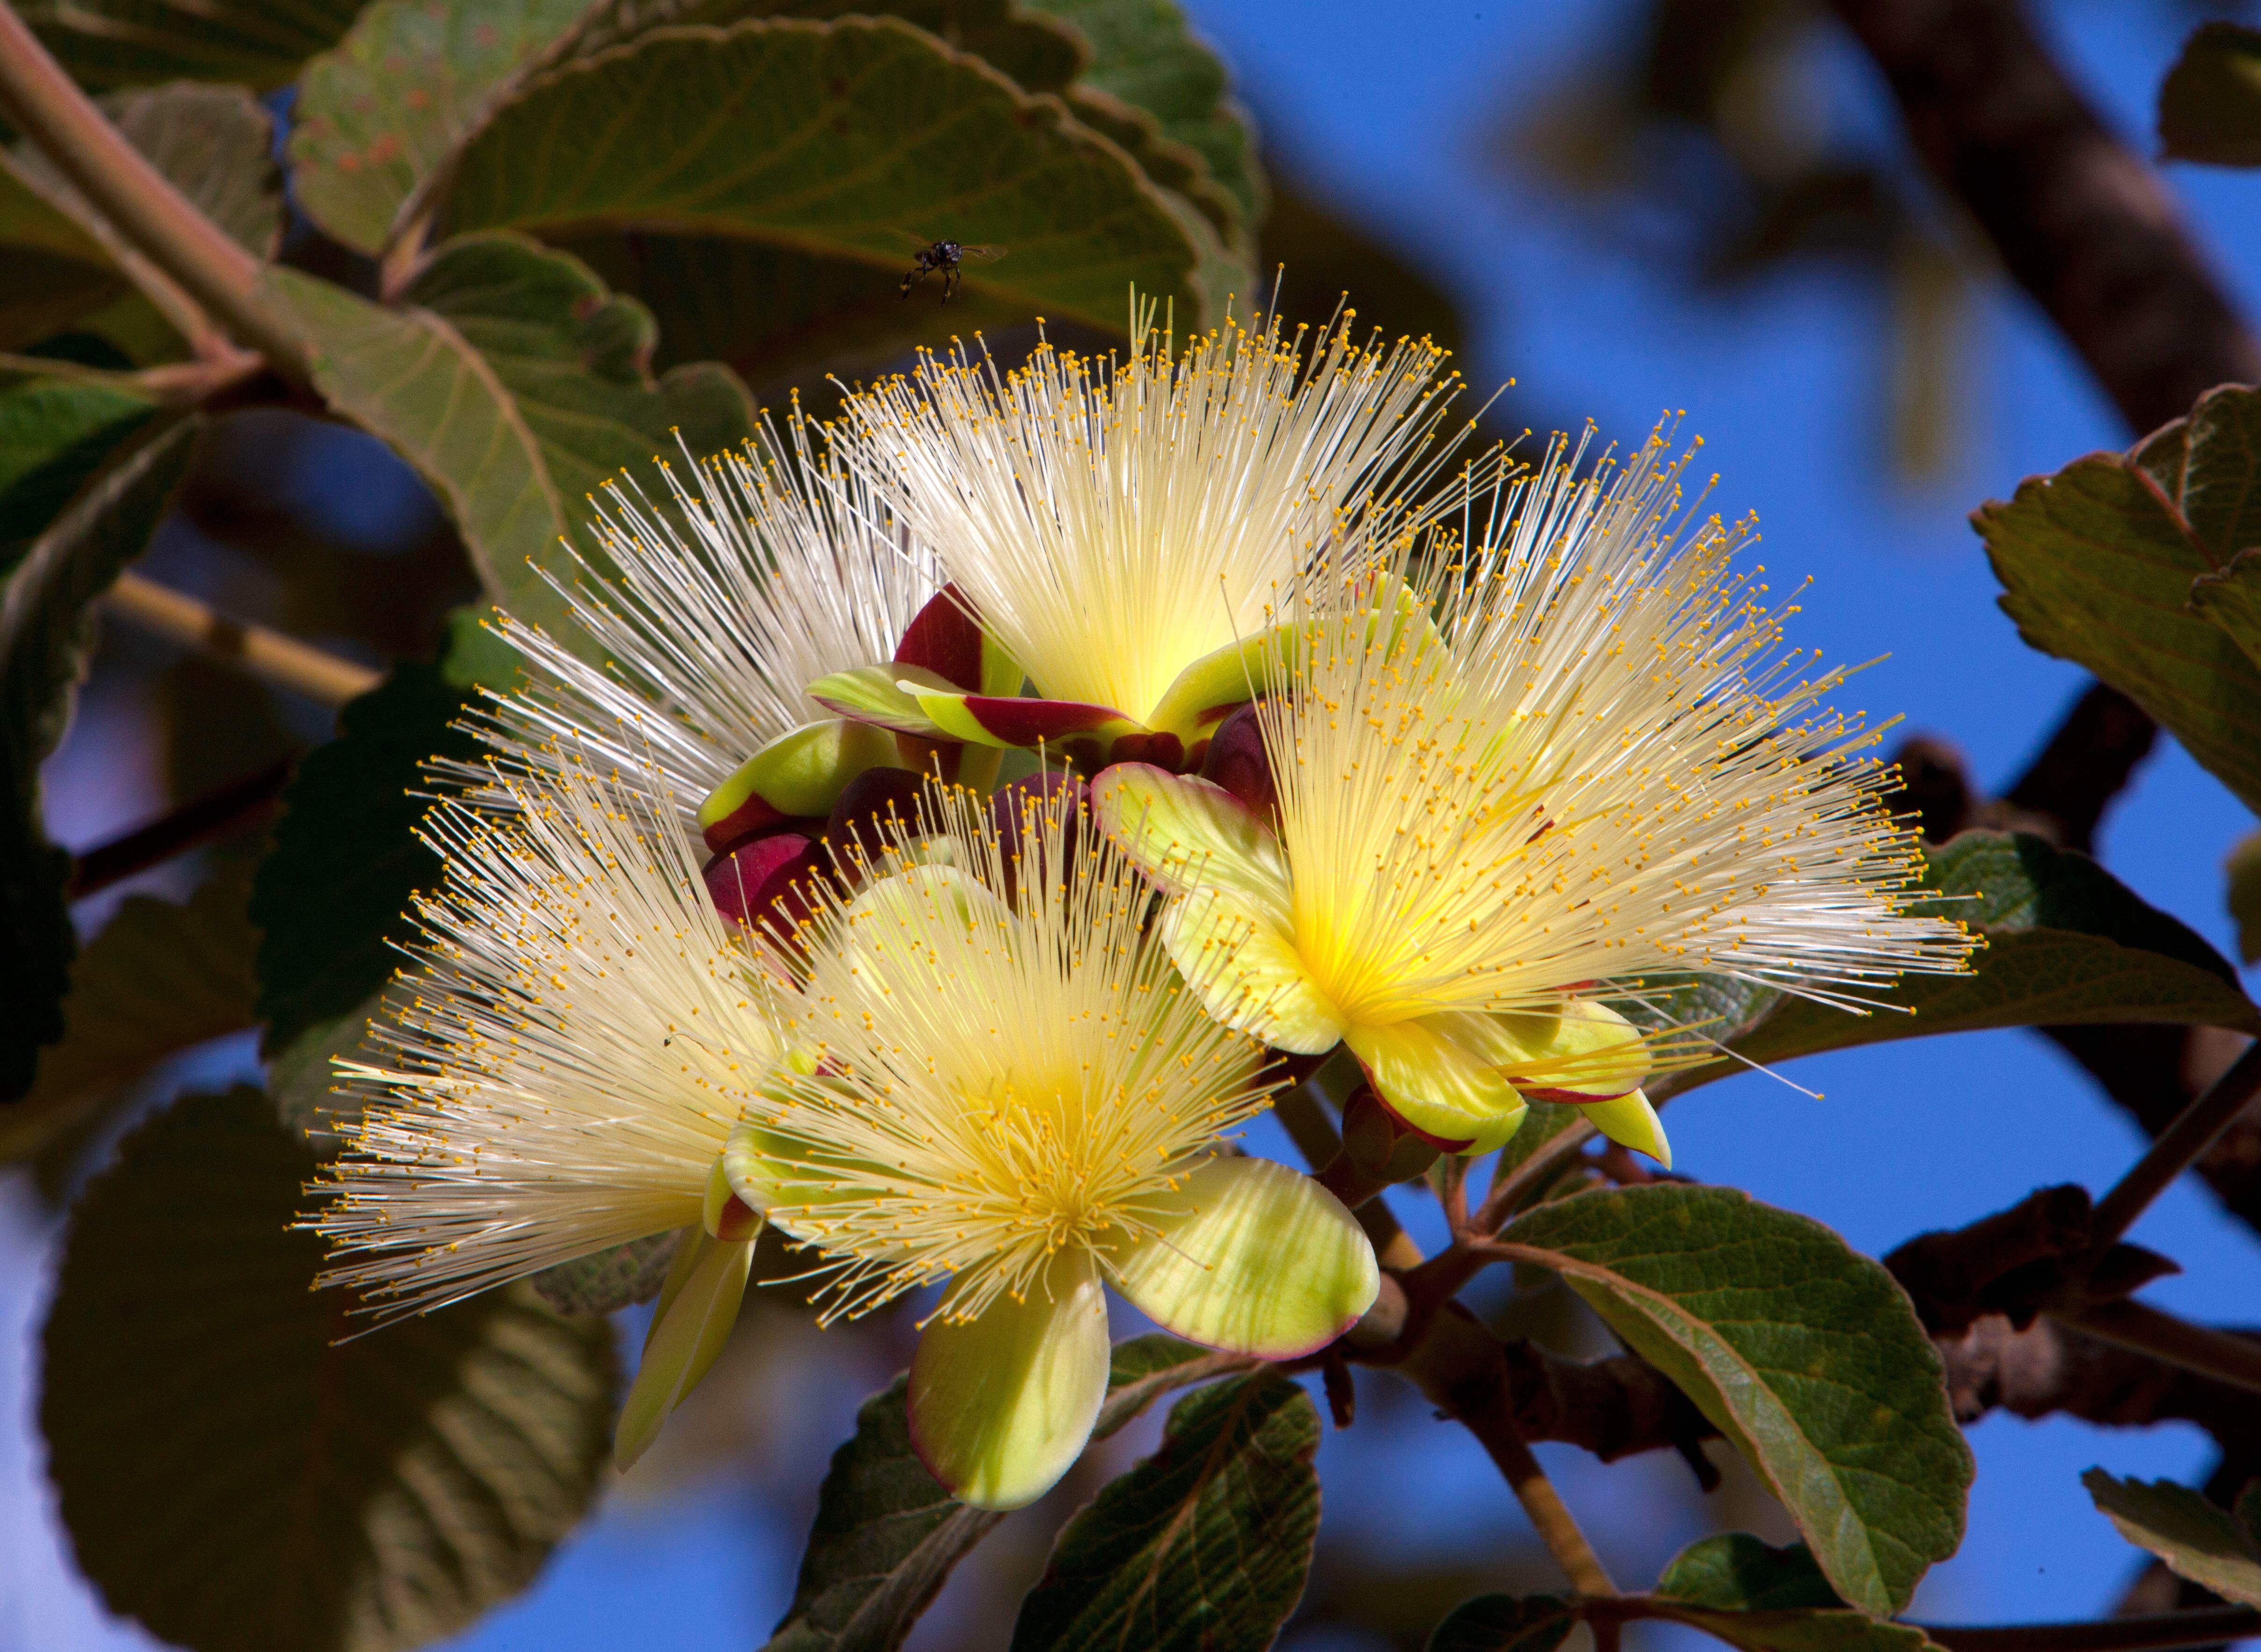 The pequi fruit tree, shown here flowering, is part of the strategy to restore forest diversity in Brazil. 